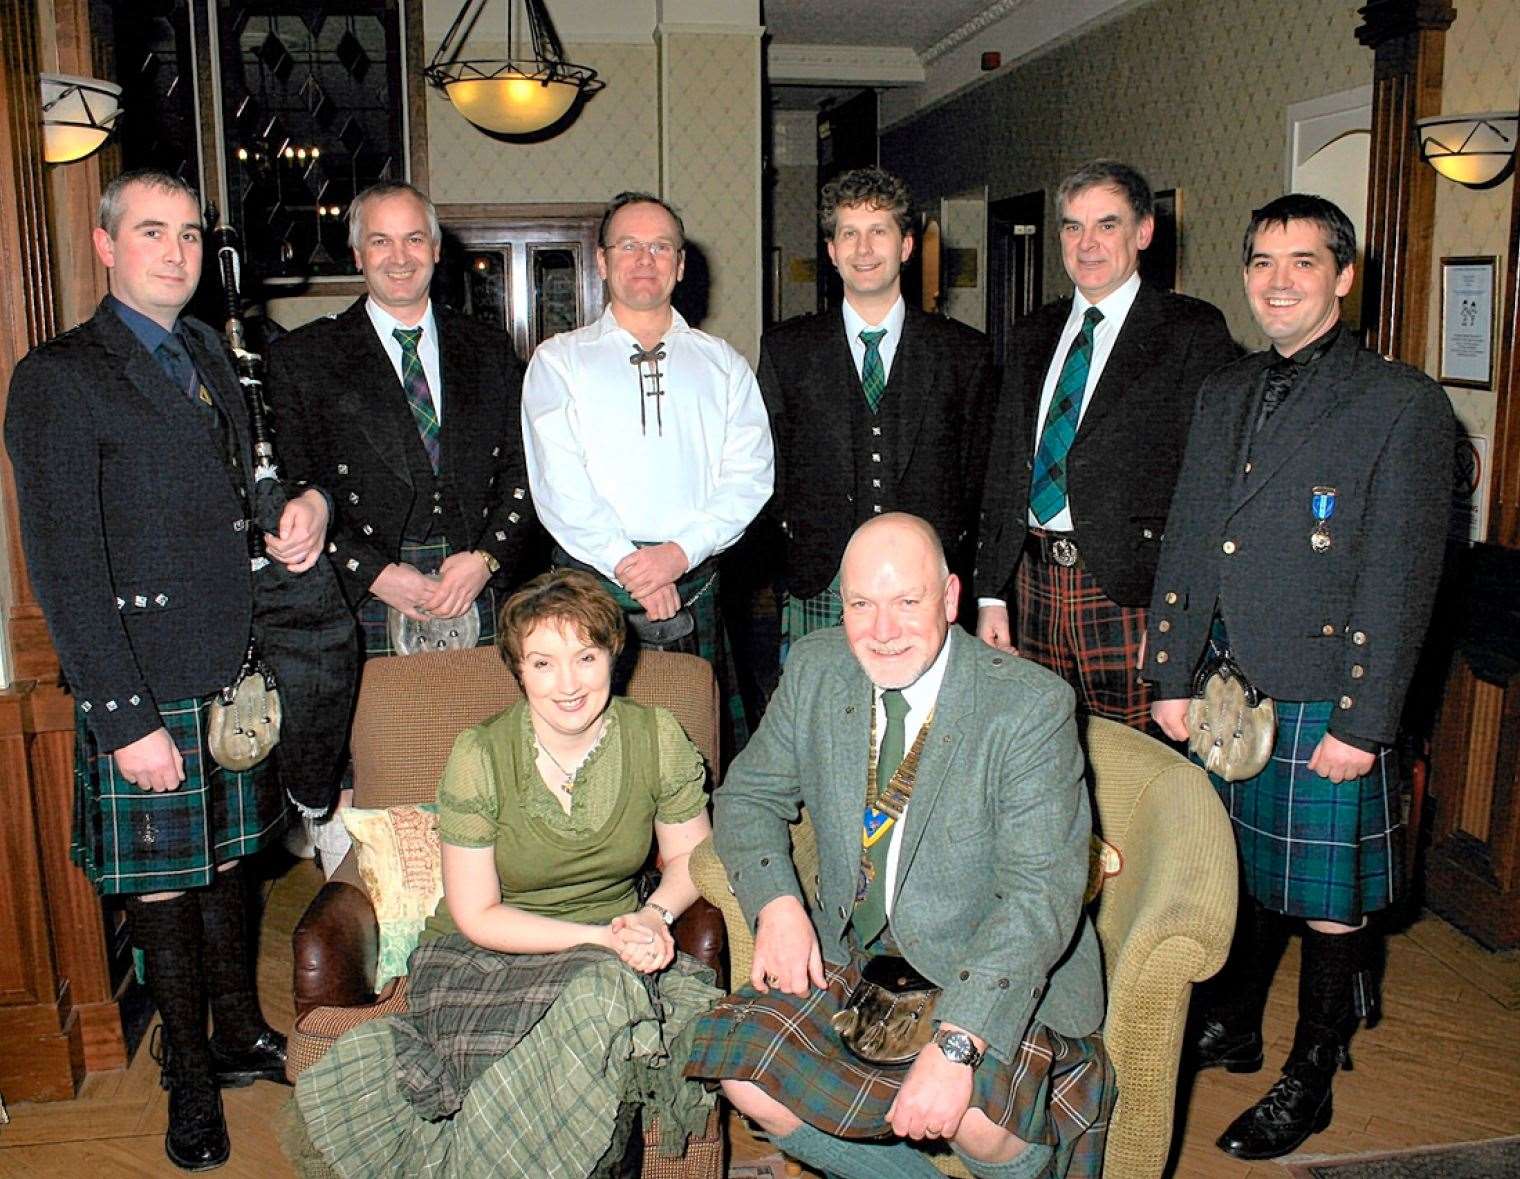 Rotarians and guests at a Burns supper held by Thurso Rotary Club in the Pentland Hotel in January 2010. The Immortal Memory was given by Craig Omand, while other guests included Raymond Bremner and piper Alan Plowman.